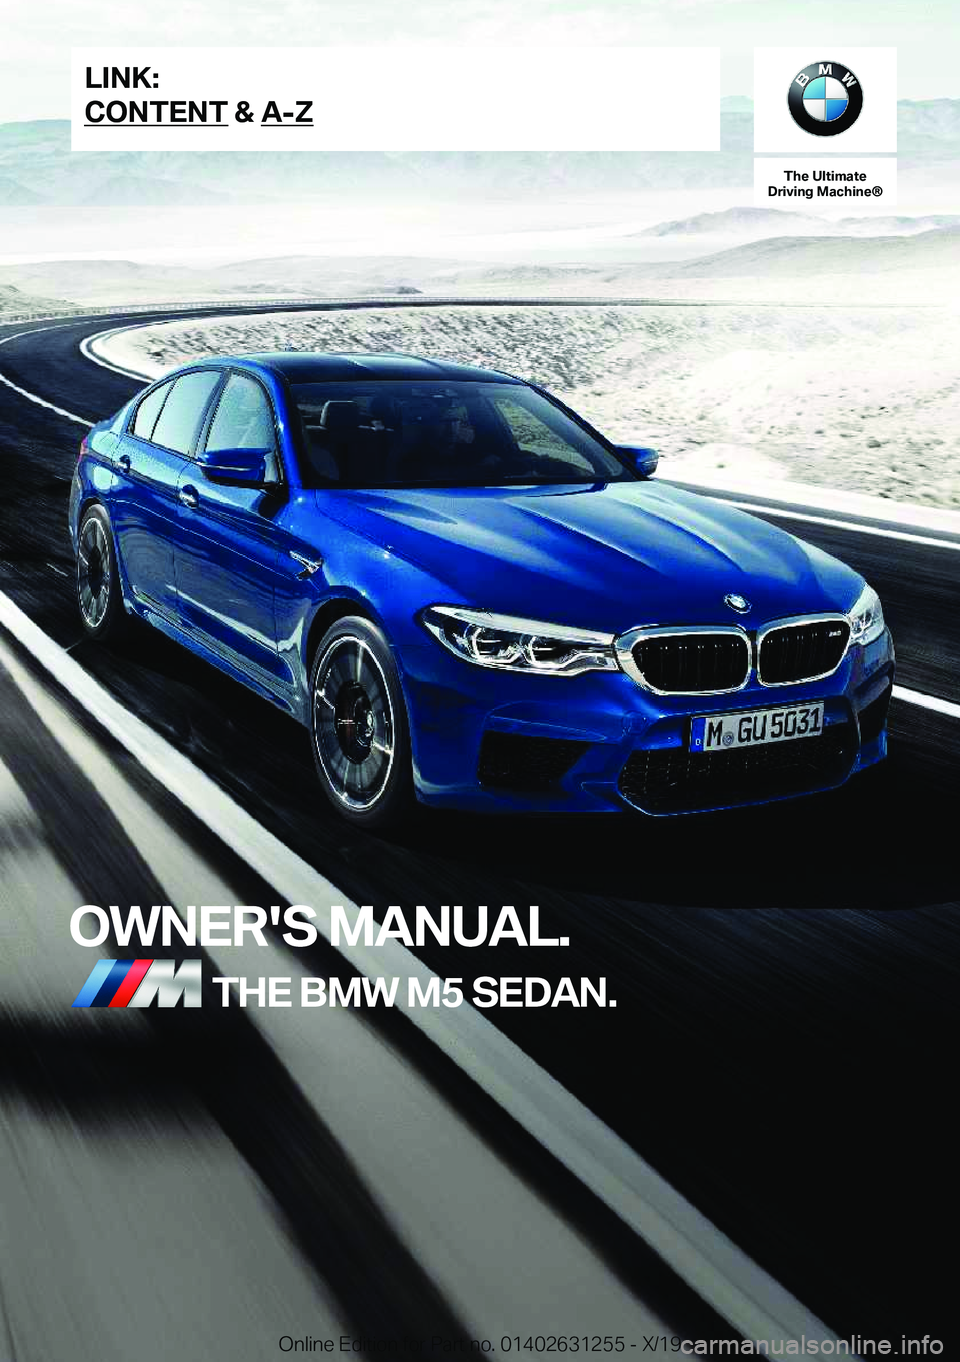 BMW M5 2020  Owners Manual �T�h�e��U�l�t�i�m�a�t�e
�D�r�i�v�i�n�g��M�a�c�h�i�n�e�n
�O�W�N�E�R�'�S��M�A�N�U�A�L�.�T�H�E��B�M�W��M�5��S�E�D�A�N�.�L�I�N�K�:
�C�O�N�T�E�N�T��&��A�-�Z�O�n�l�i�n�e��E�d�i�t�i�o�n��f�o�r�